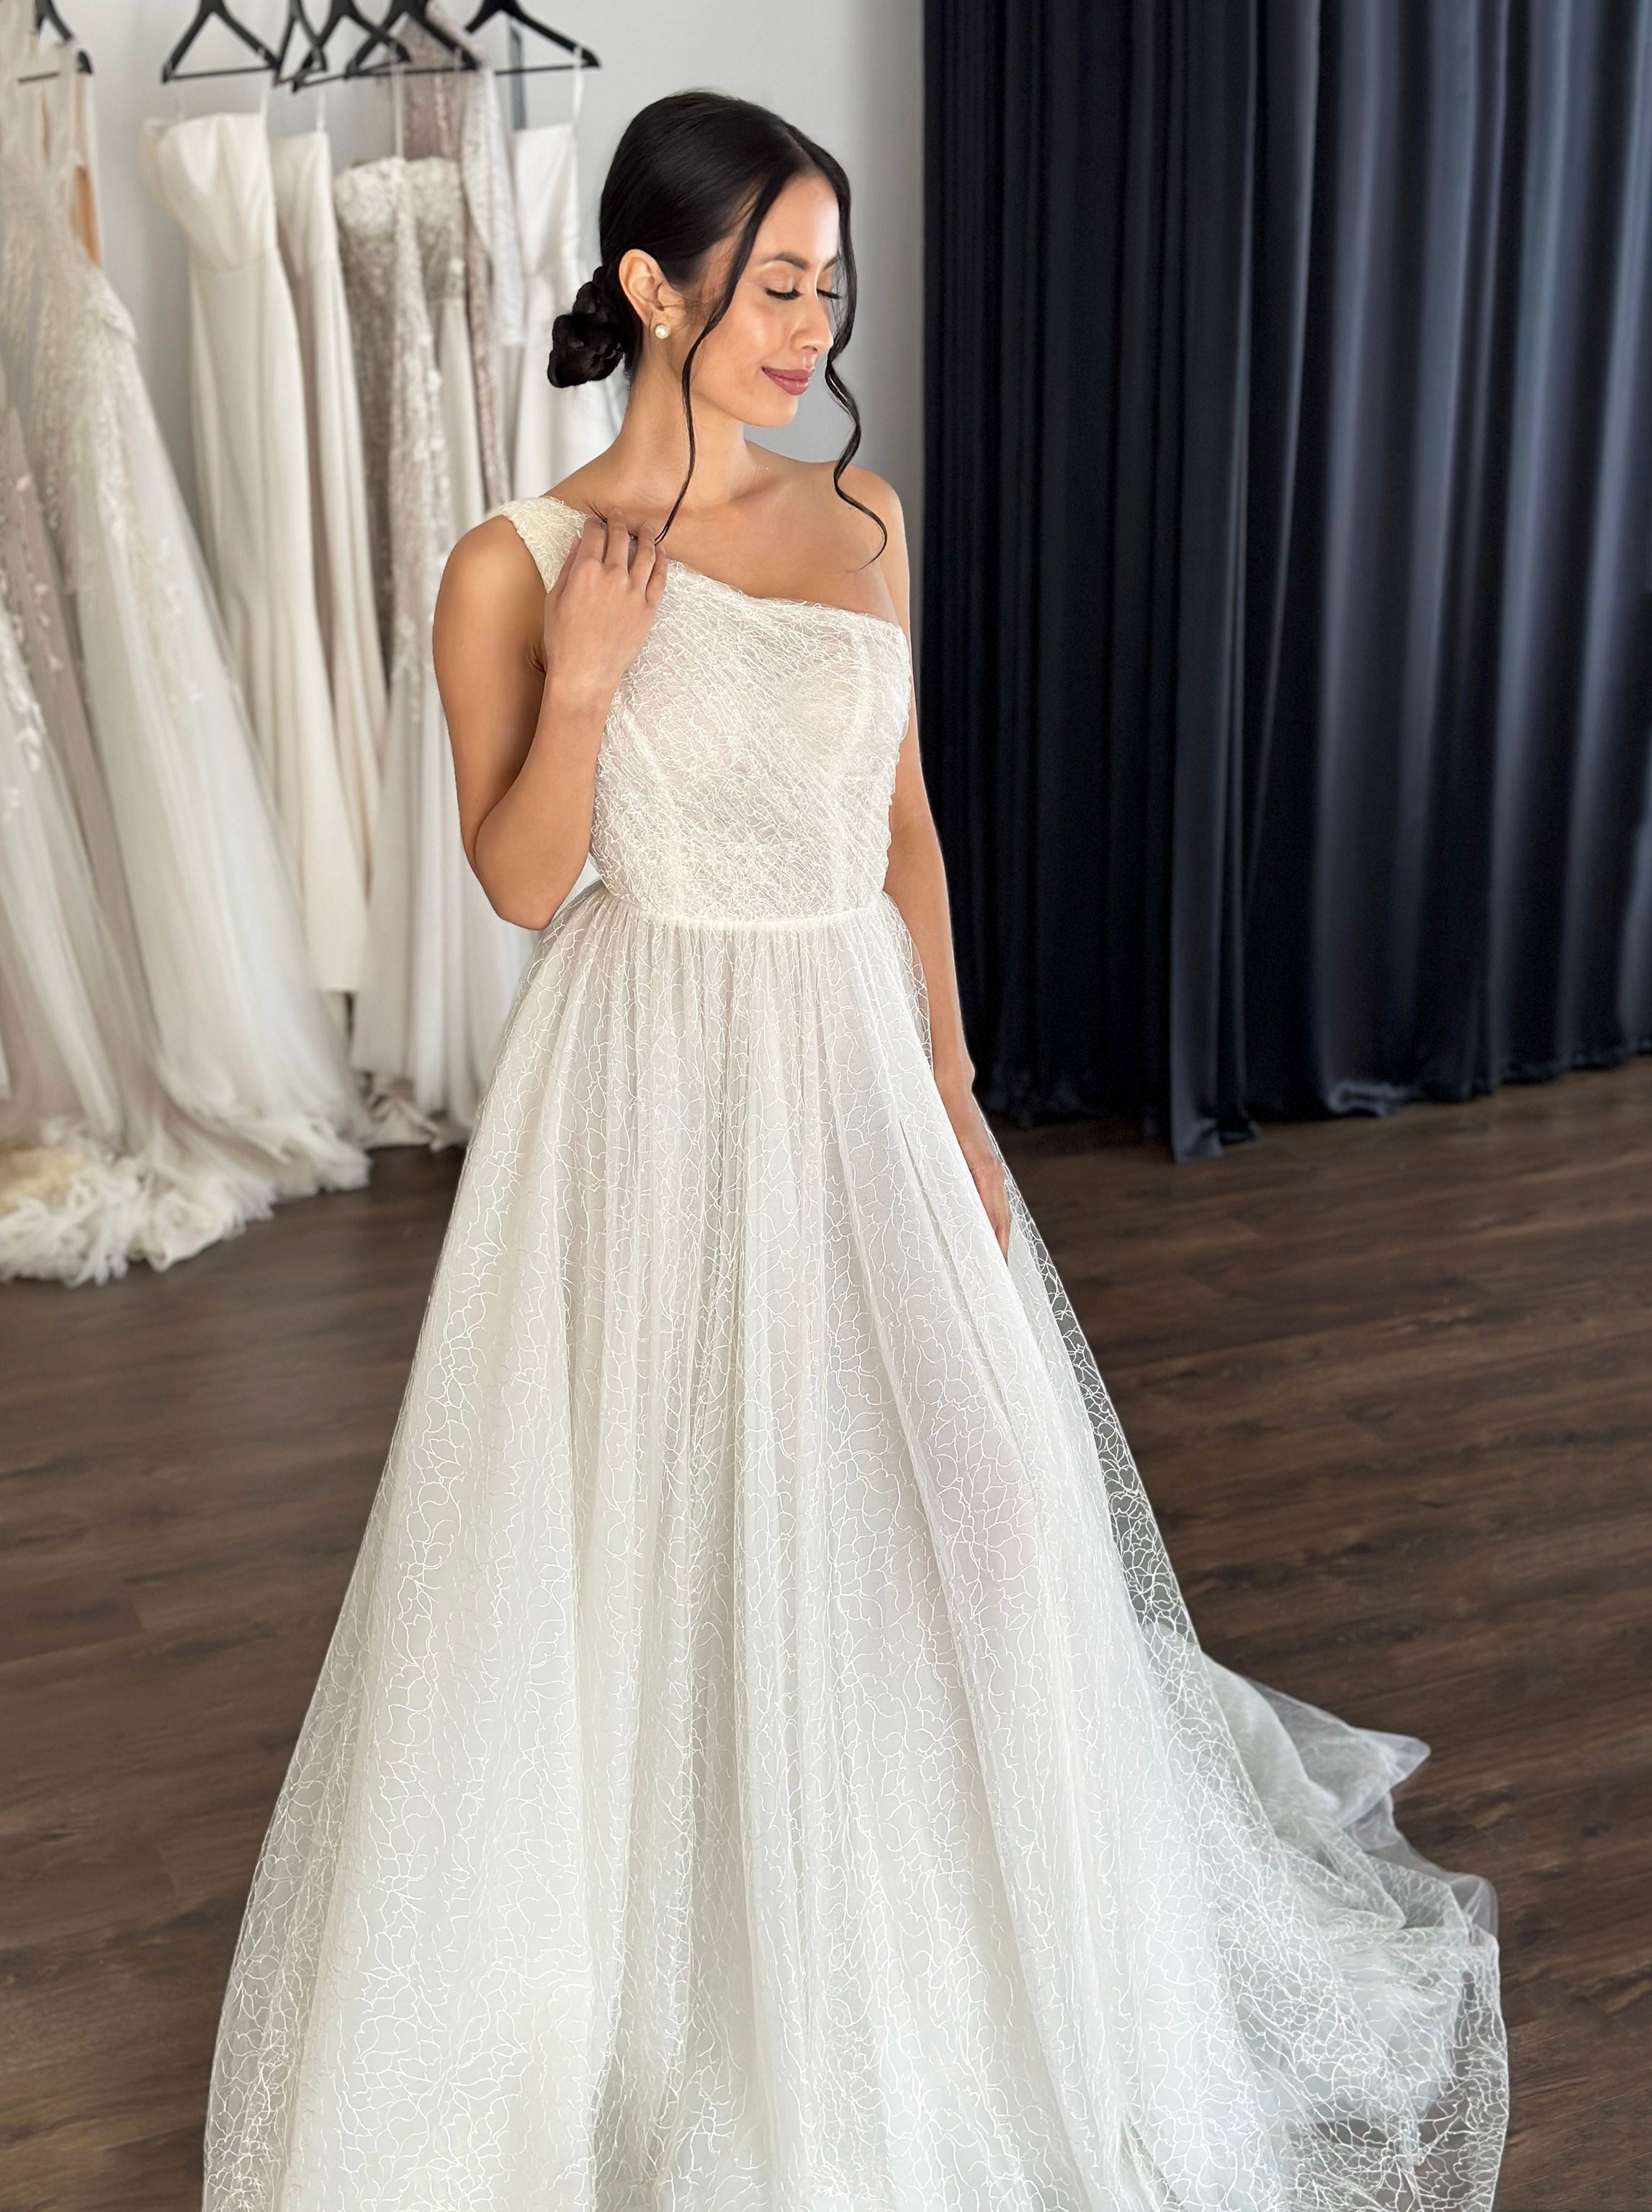 woman posing in embroidered lace wedding dress with one shoulder strap design